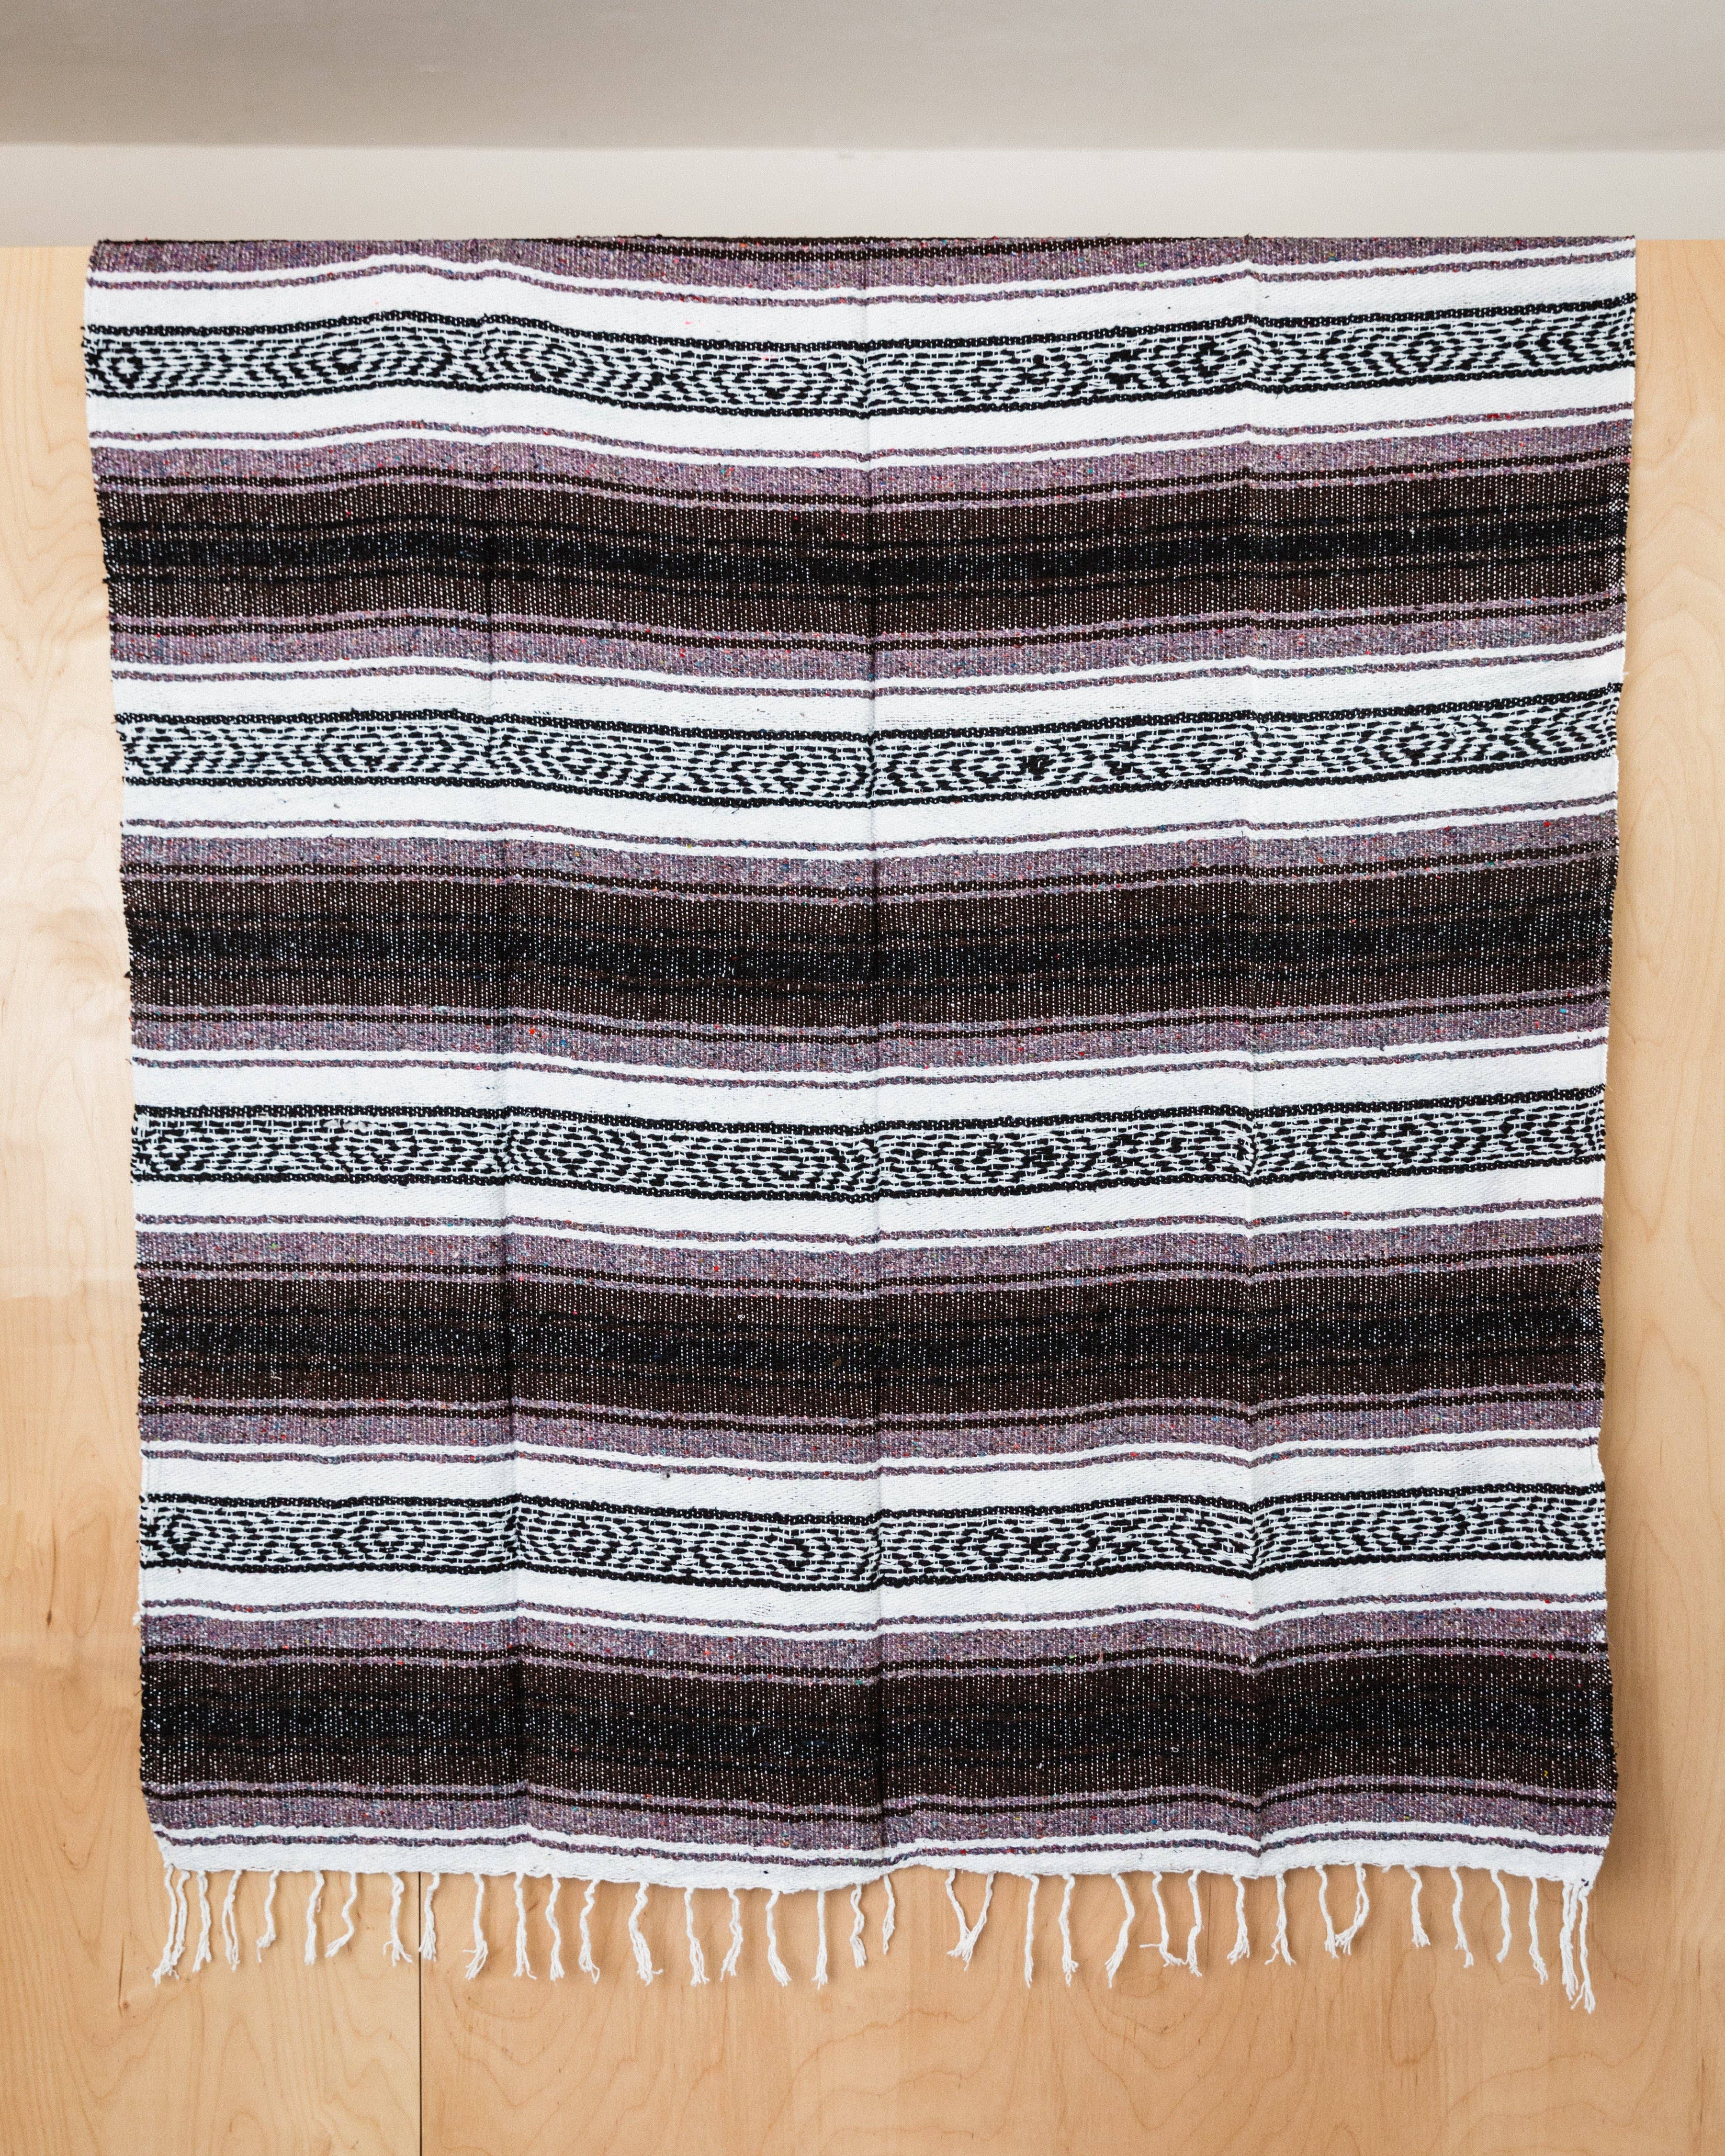 CHARCOAL GRAY TRIBAL SOLID BLANKET Mexican Fiesta Decor SOUTHWESTERN 4' x 6' 